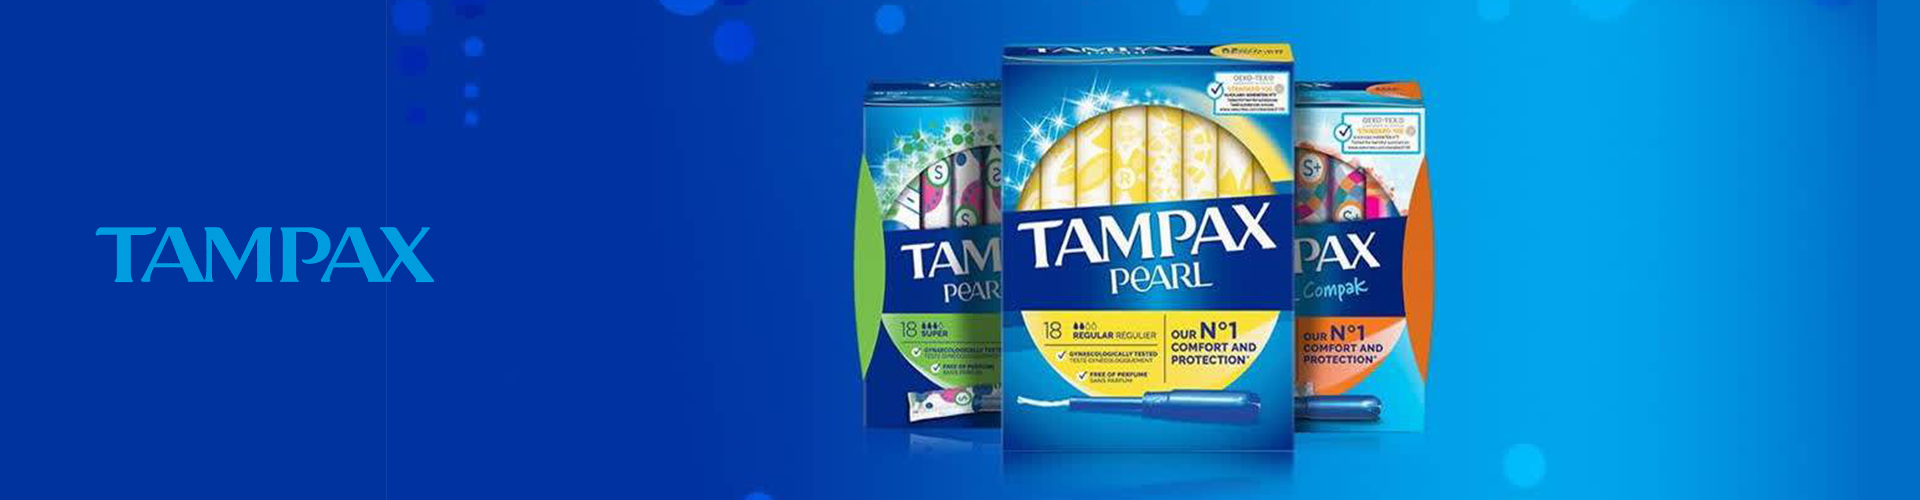 TAMPAX Banner